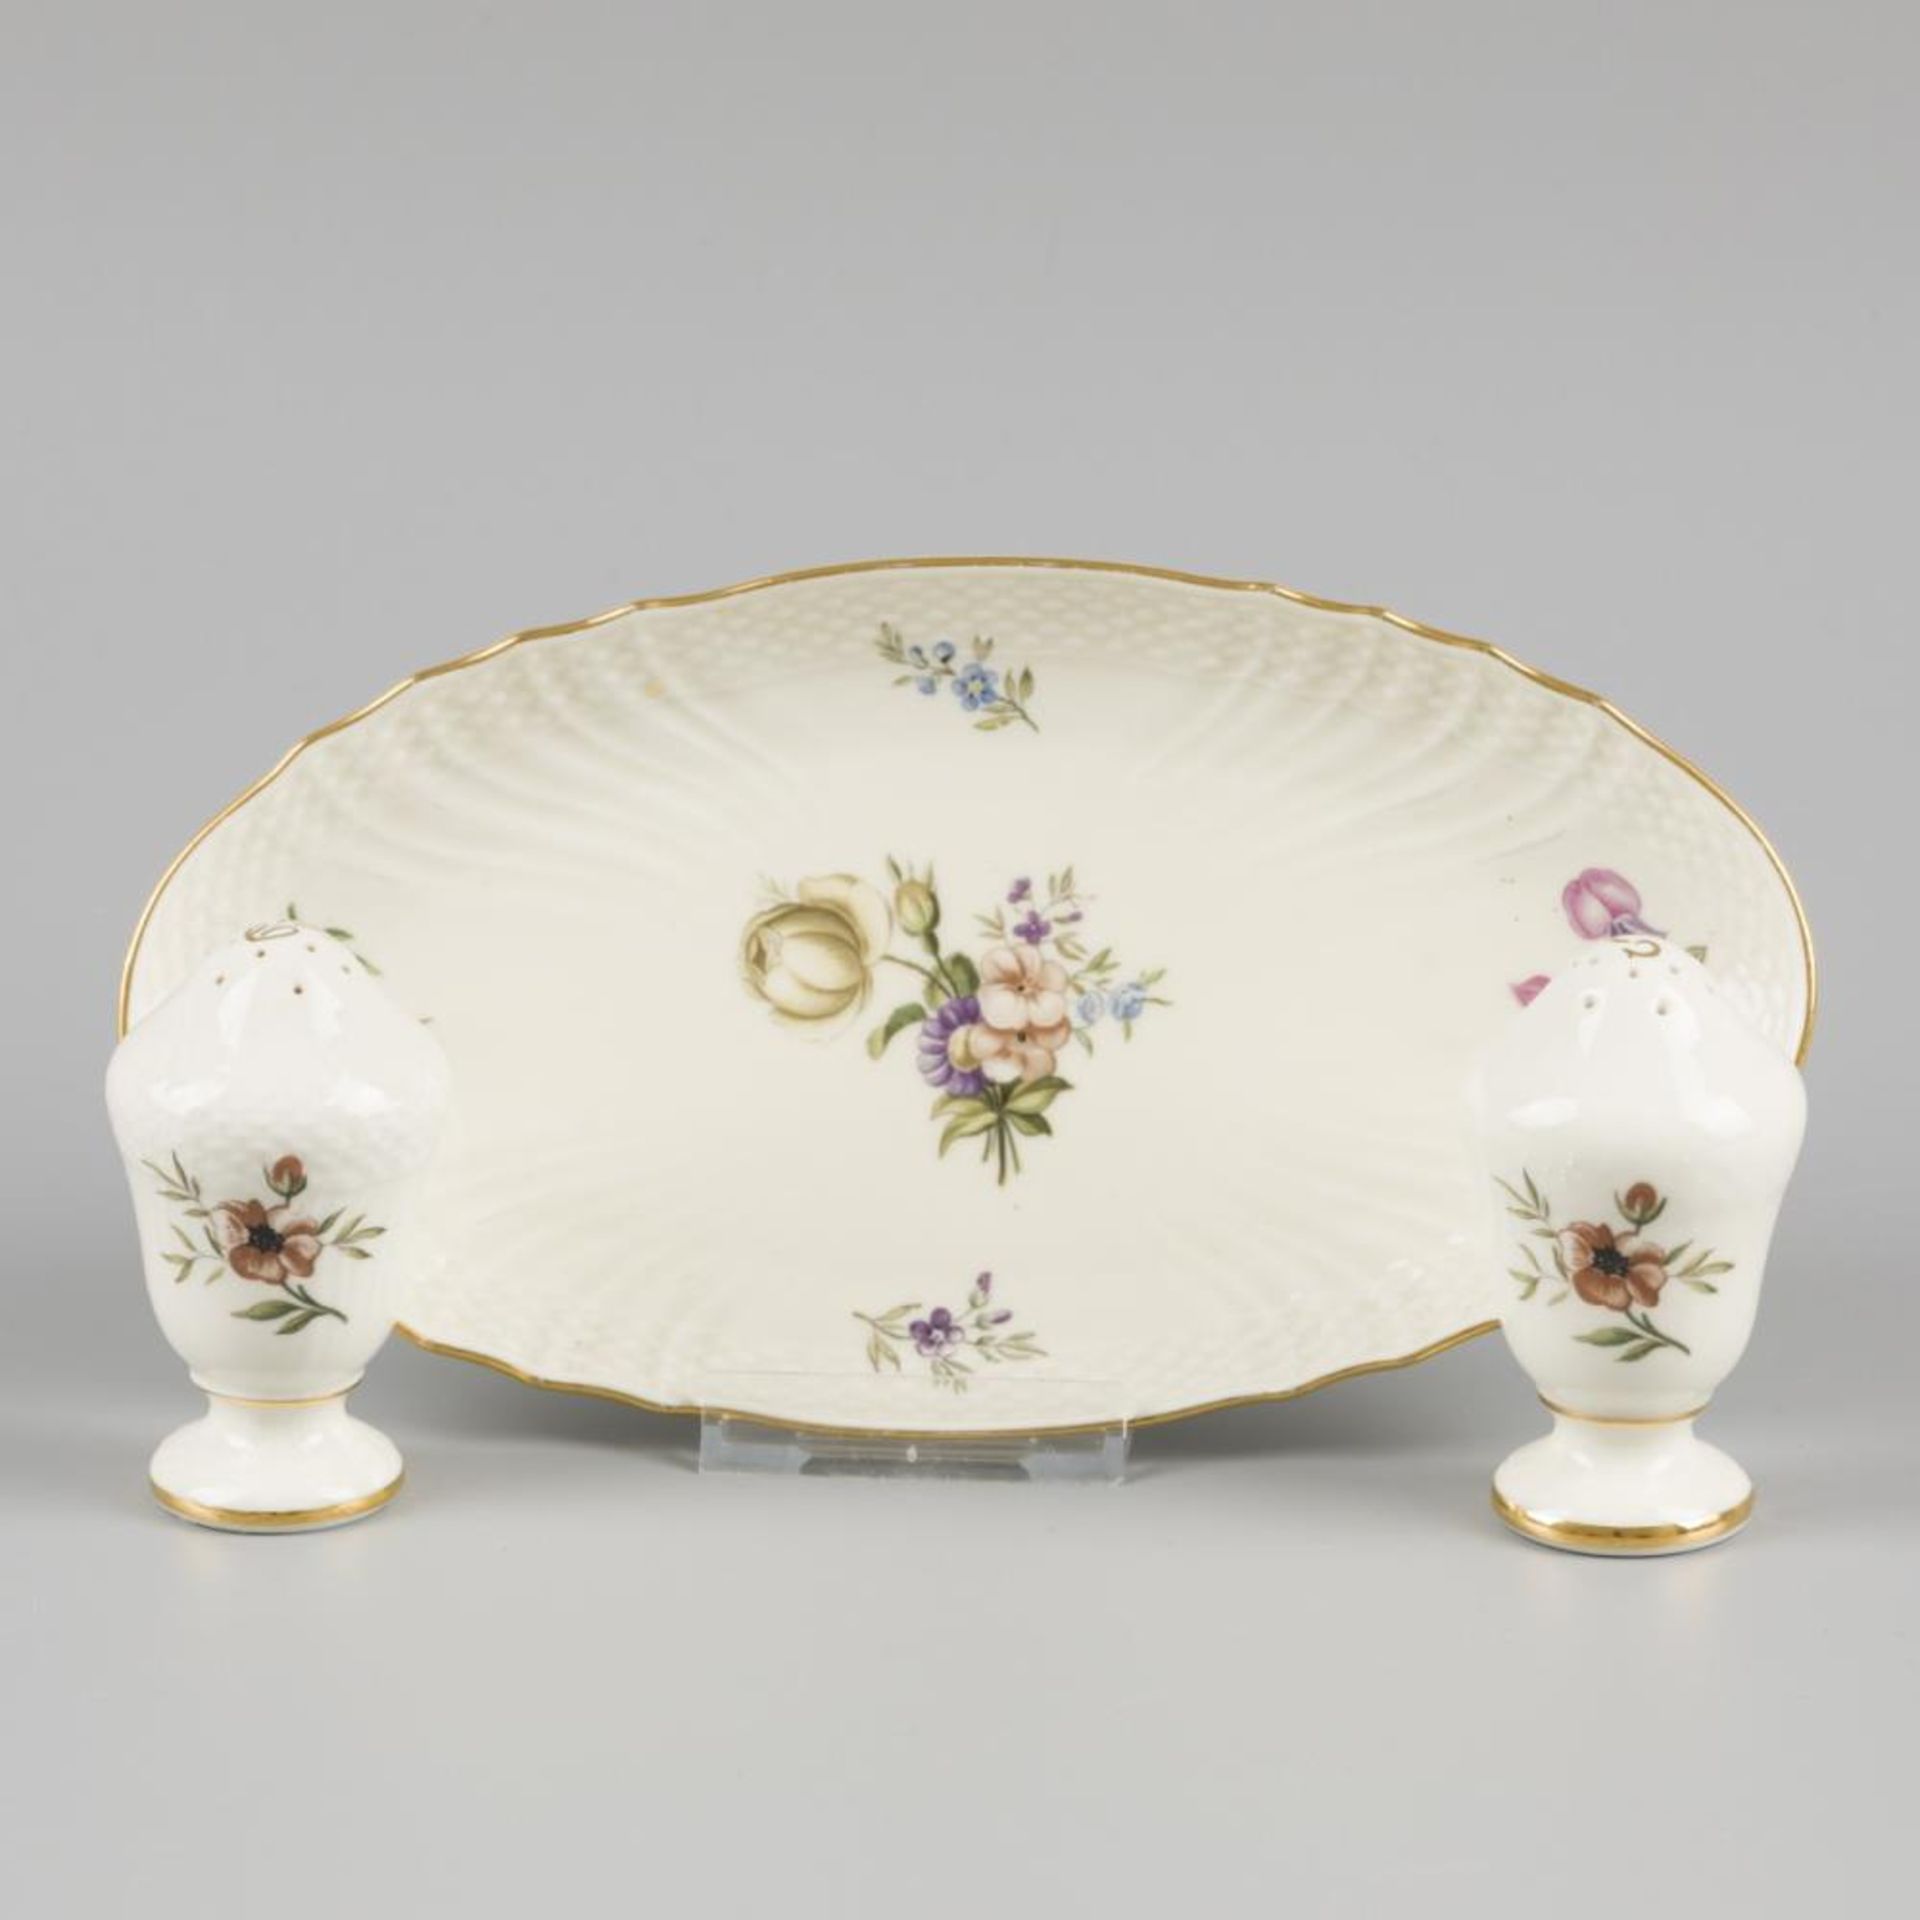 A porcelain salt and pepper shakers with a saucer decorated with flowers, marked Royal Copenhagen. D